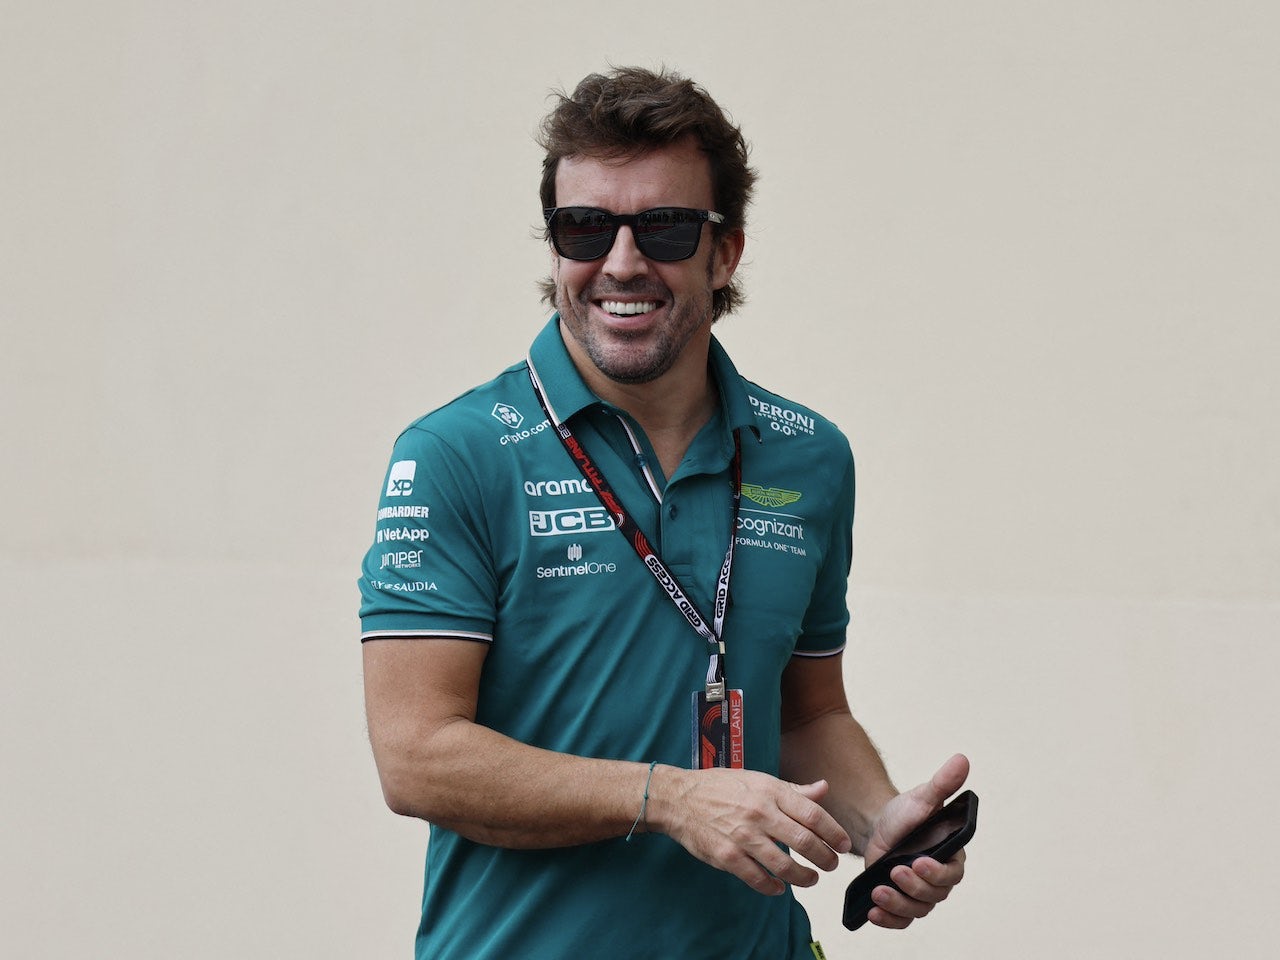 New Alonso contract not agreed yet - Krack